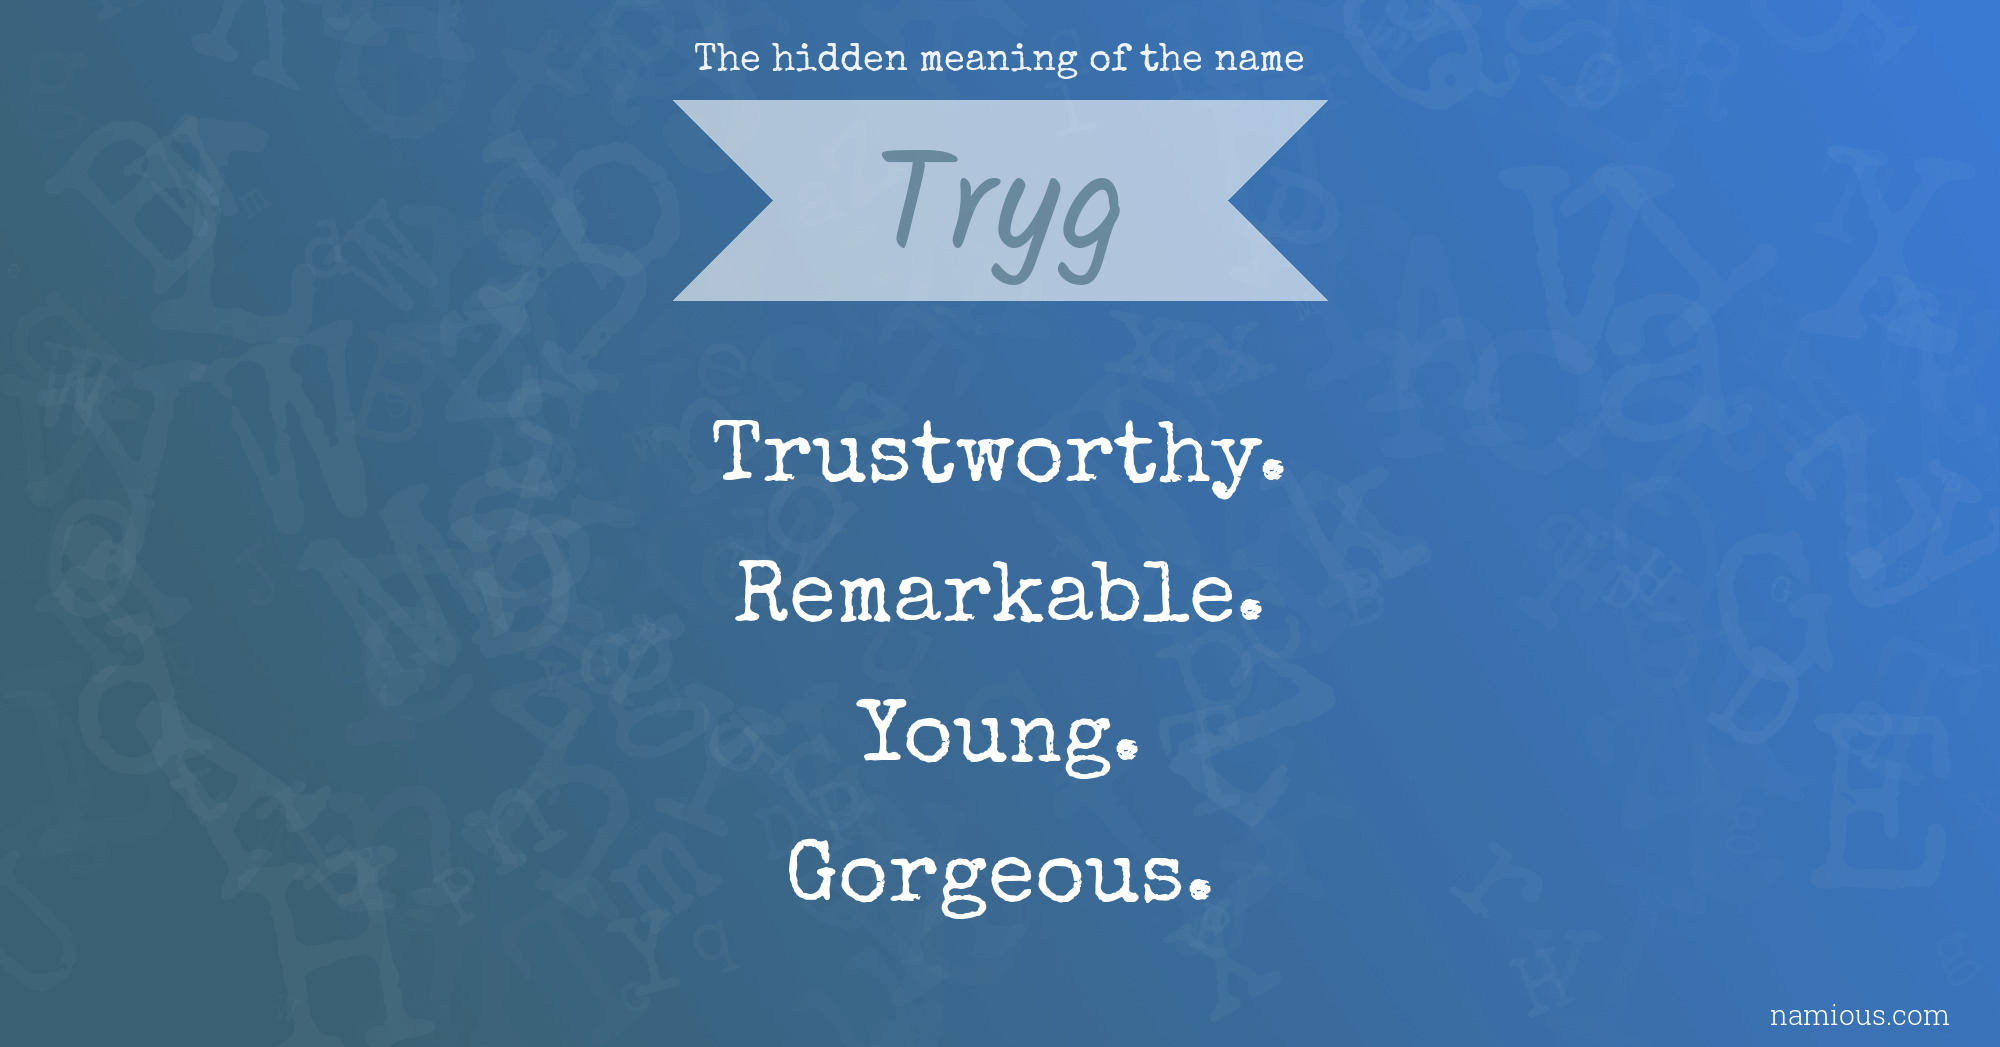 The hidden meaning of the name Tryg